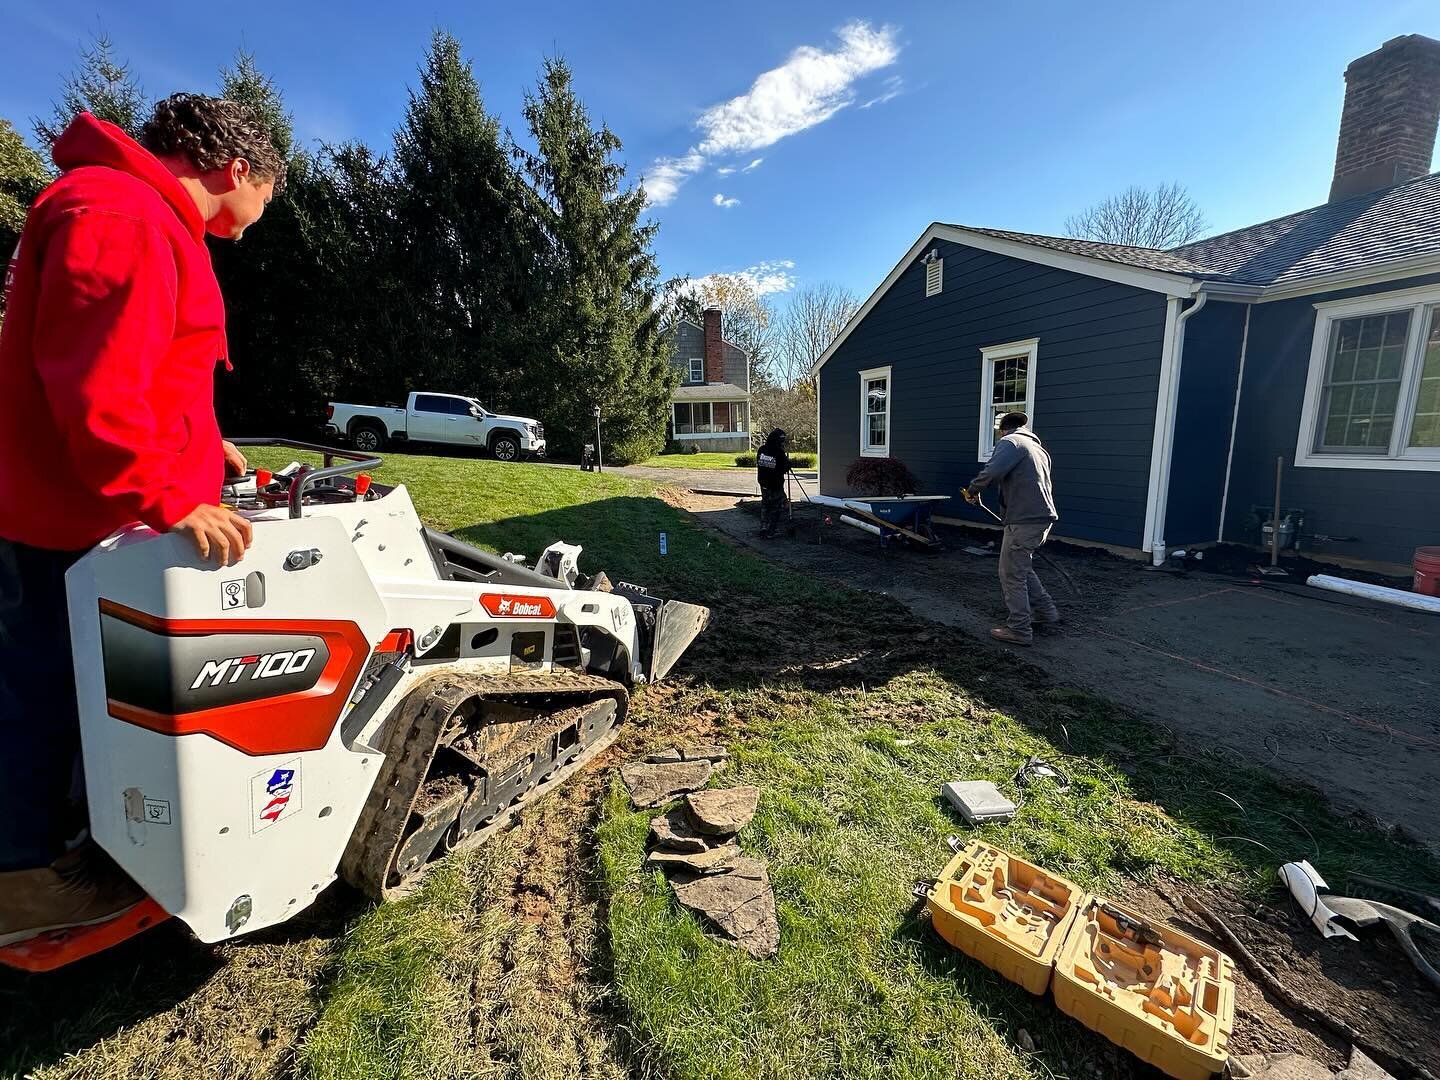 Exciting things are happening! One of our crews just kicked off a stunning walkway and drainage project this week! Stay tuned for the transformation! 🔨💧 Don't miss the progress &ndash; keep checking back for updates and the grand reveal! 

#Hardsca